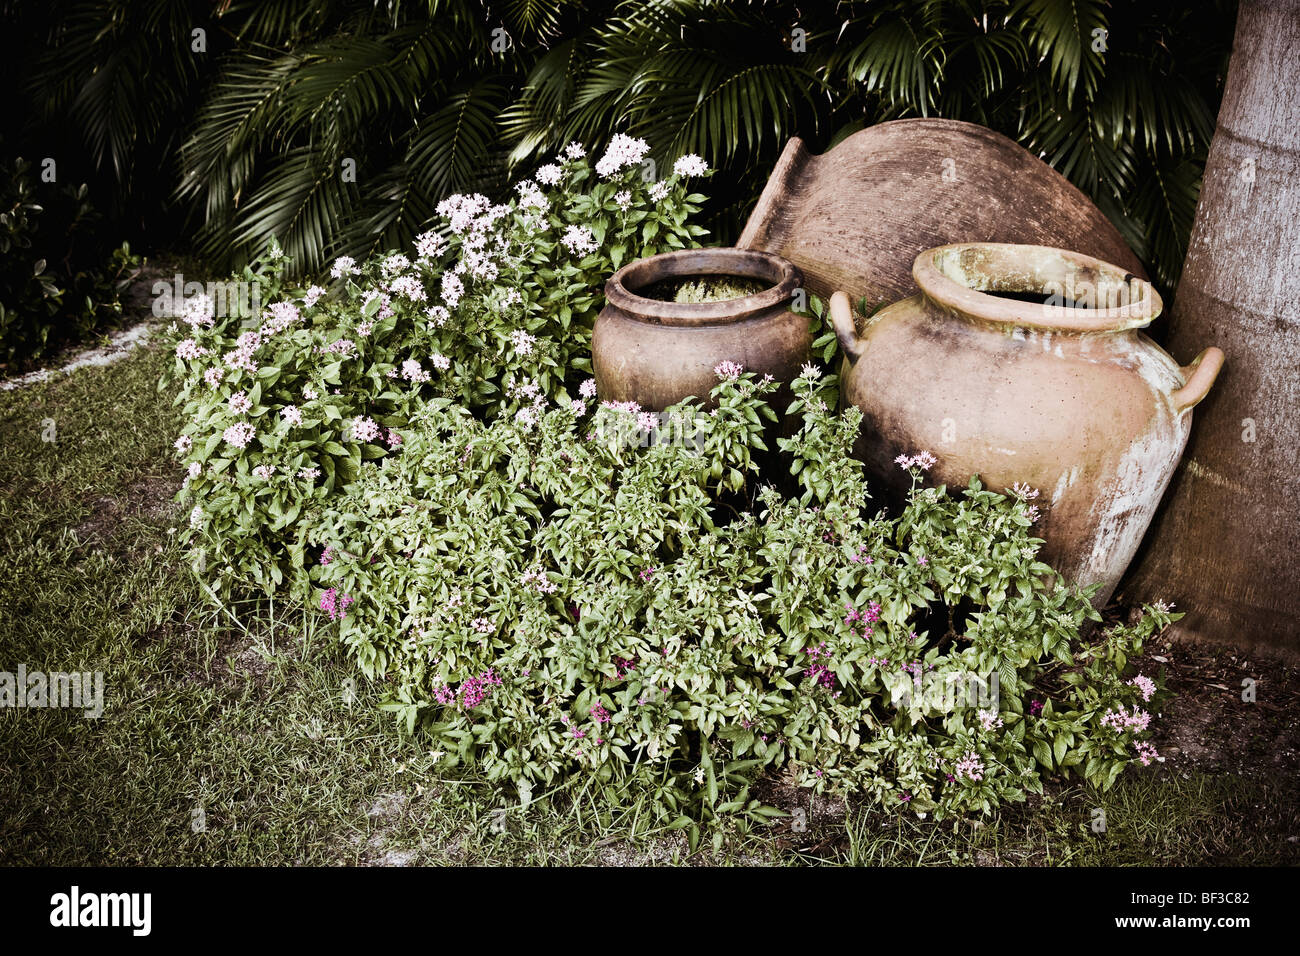 Pots in a lawn Stock Photo